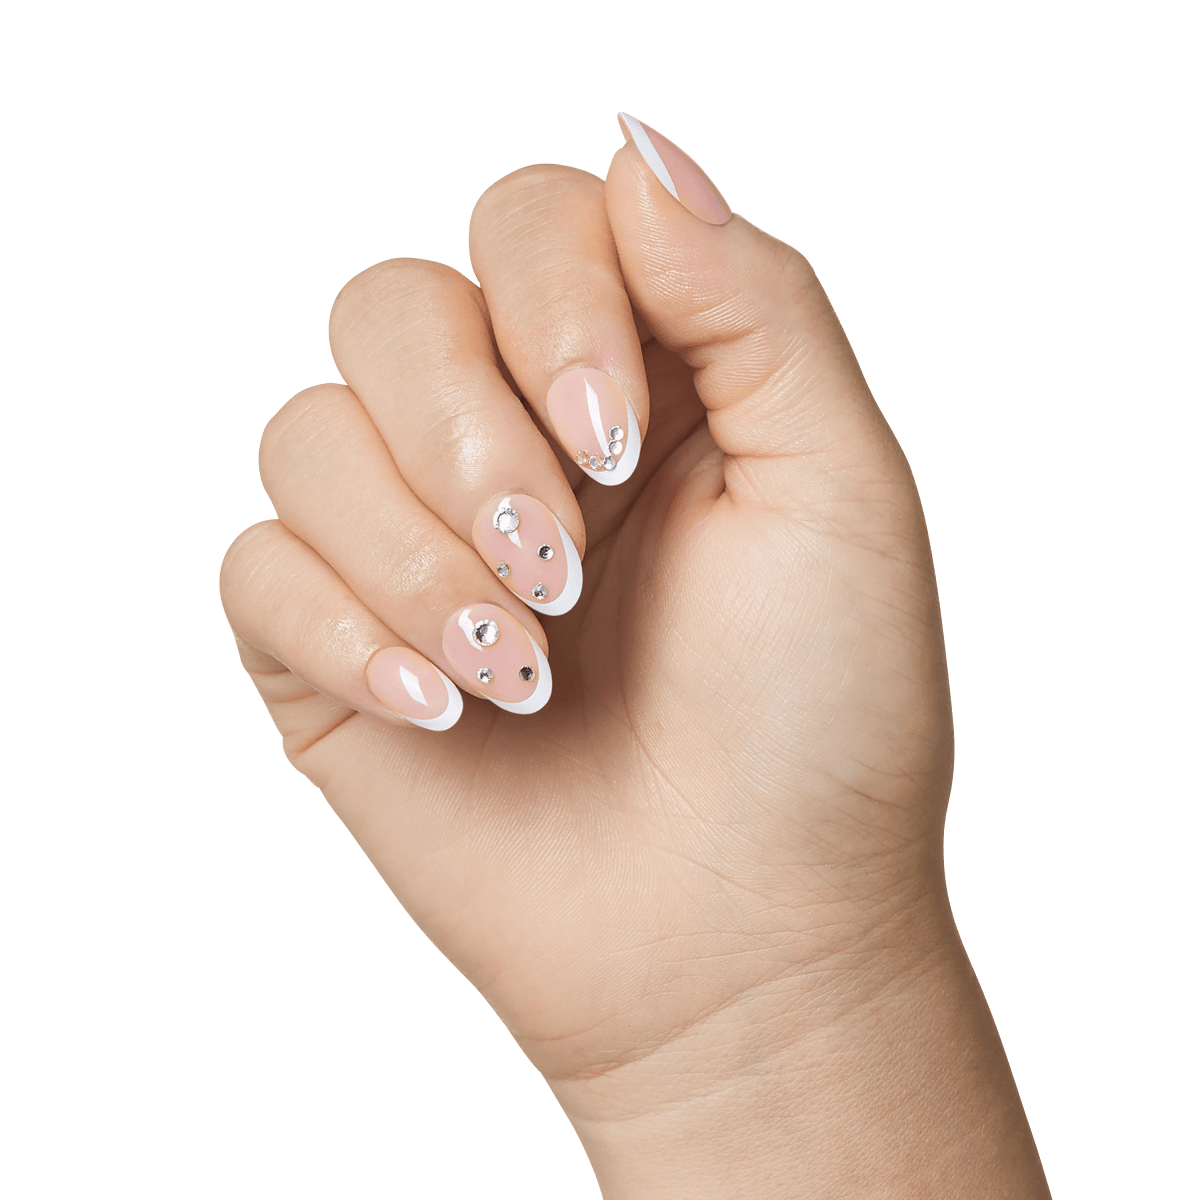 Pin by Only Girlx on N a i l s | Oval nails, Stylish nails, Simple nails